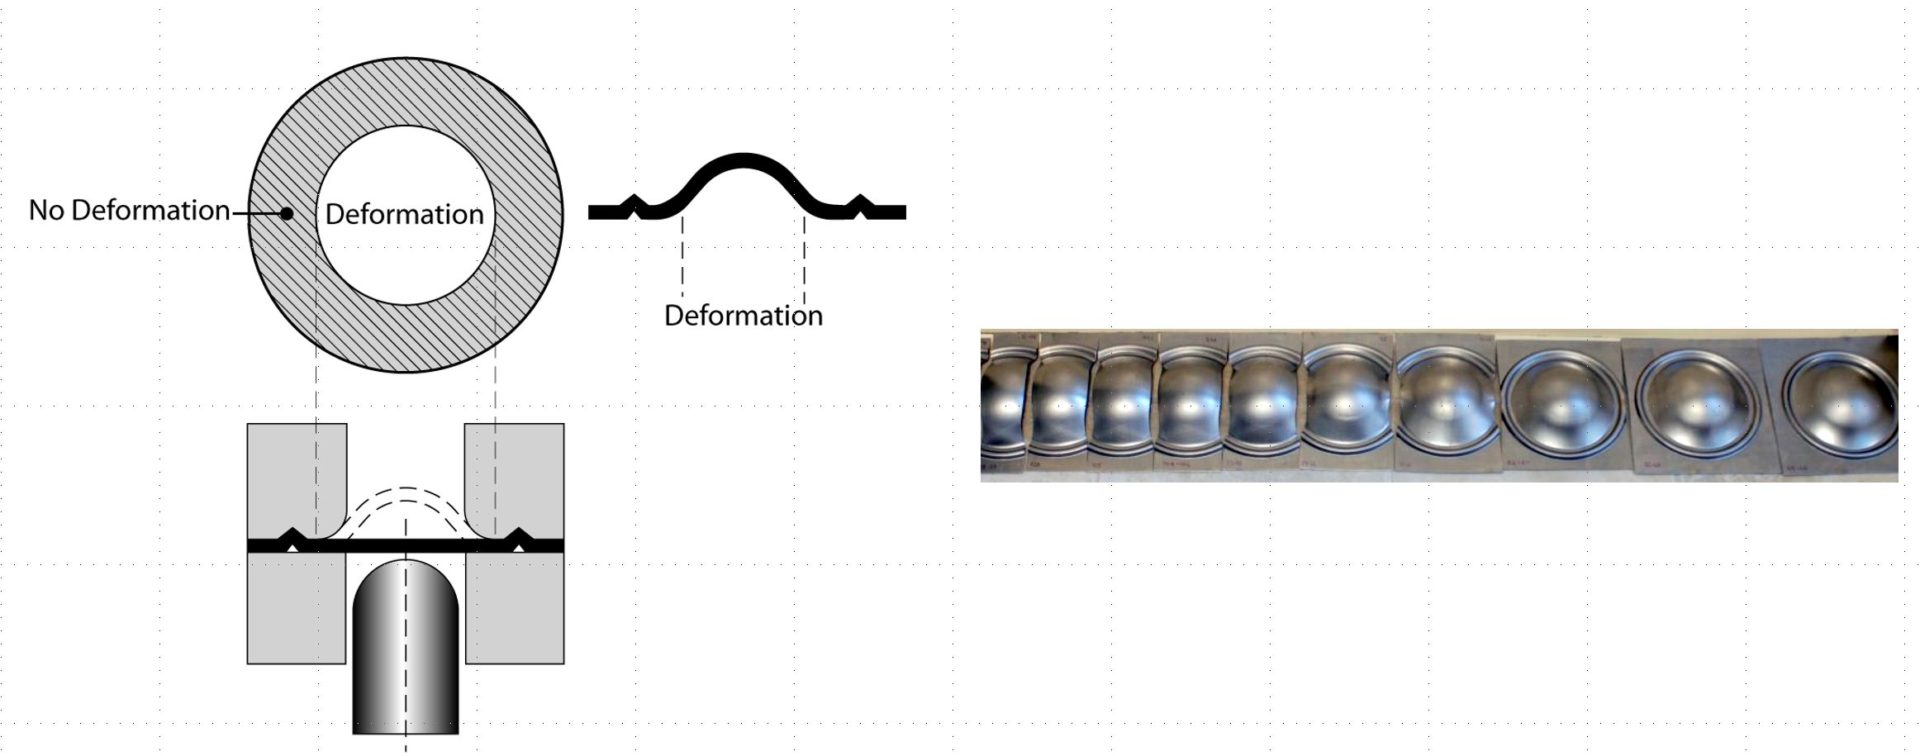 Figure 2:  Forming limit curves can be created by deforming multiple samples of different widths. Narrow strips on the left allow metal to flow in from the unconstrained edges, creating a draw deformation mode leading to strains that plot on the left side of the FLC.  Fully constrained samples, shown on the rightE-2, create a stretch deformation mode leading to strains that plot on the right side of the FLC.